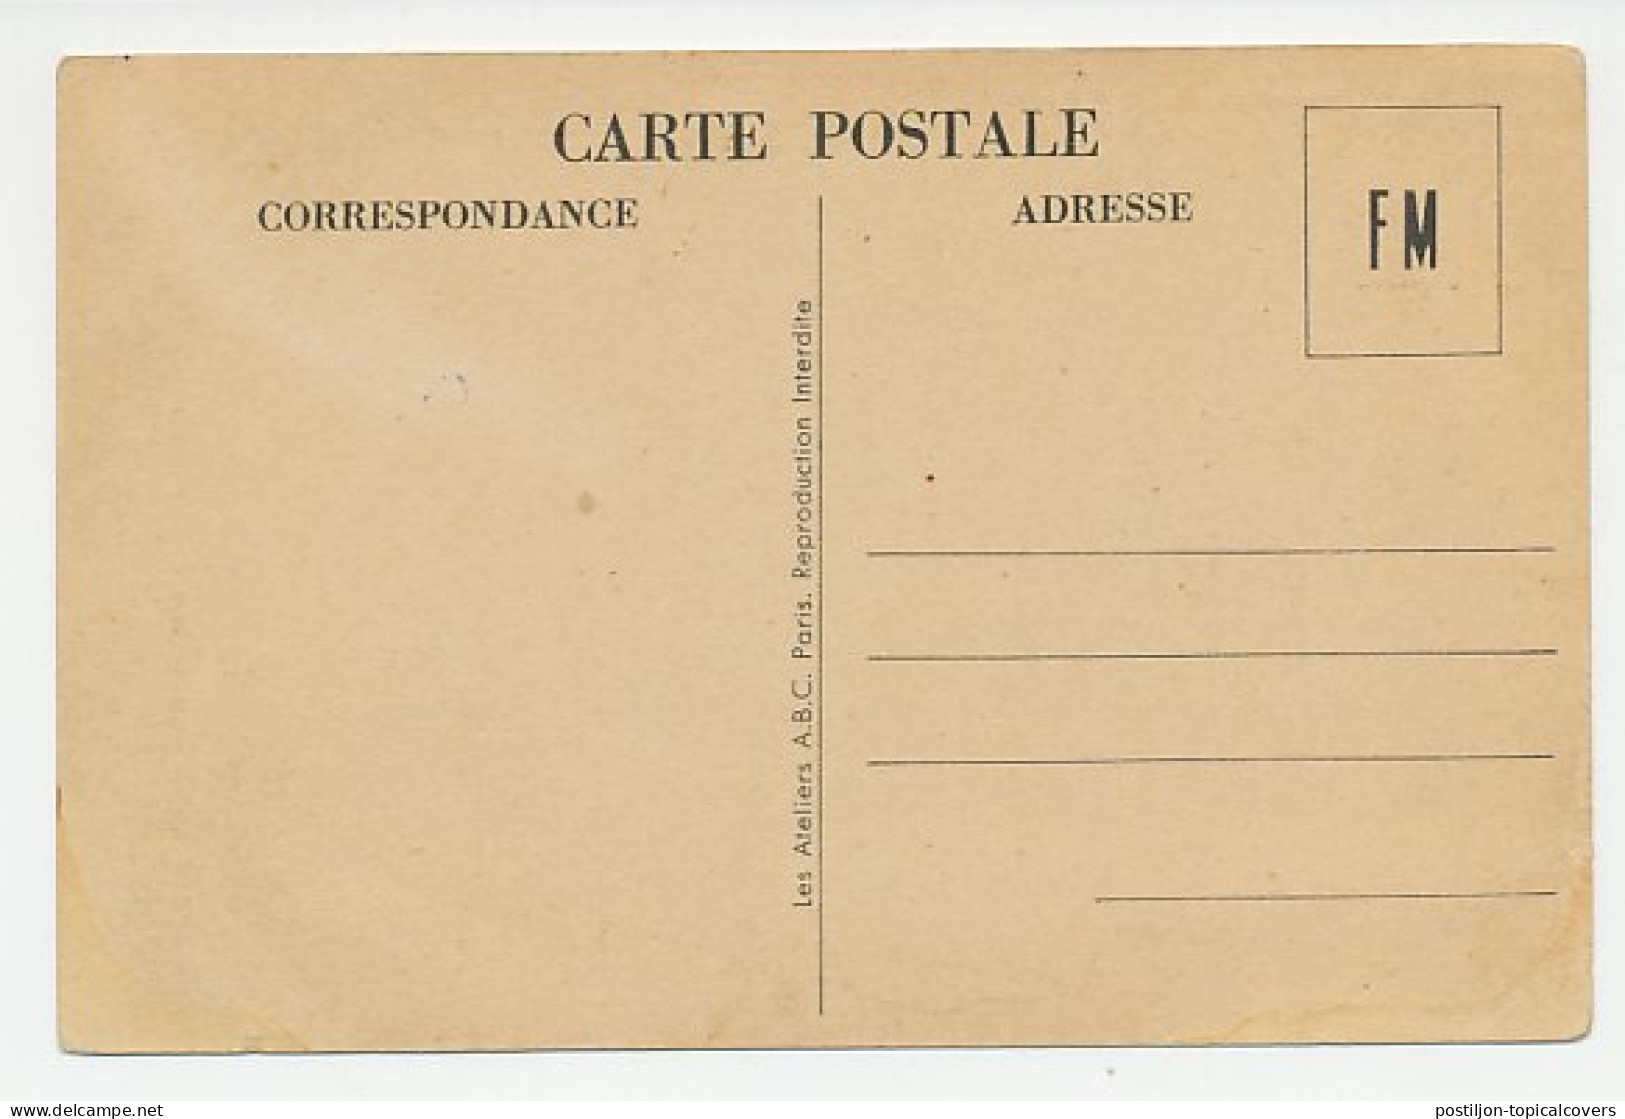 Military Service Card France Pipe Smoking - WWII - Tabak